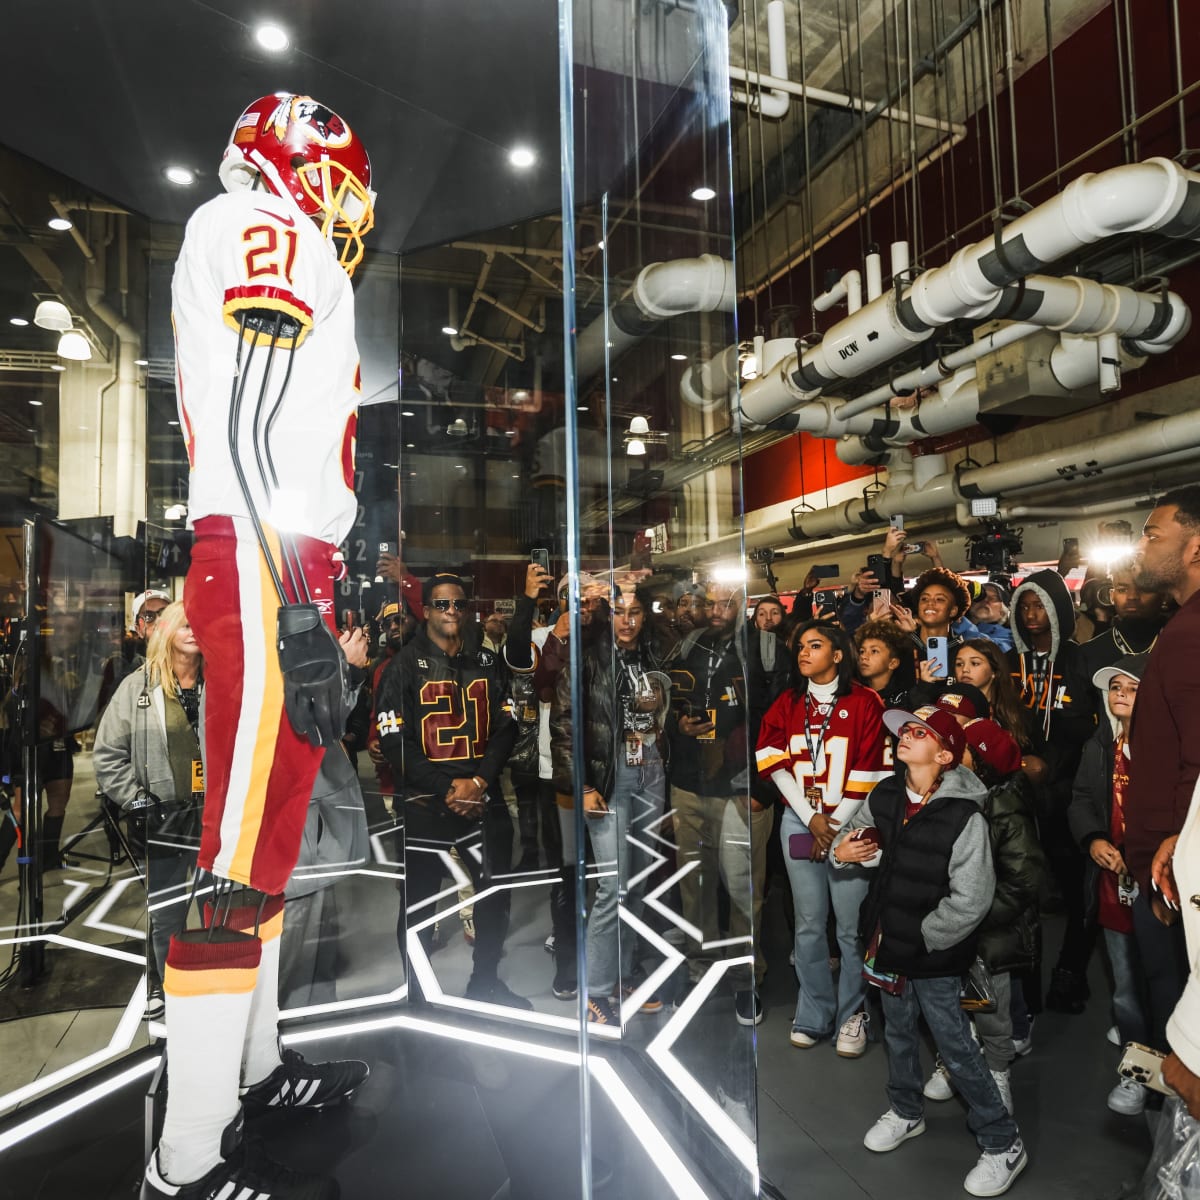 Sean Taylor Statue' is a Mannequin; Washington Commanders Ripped